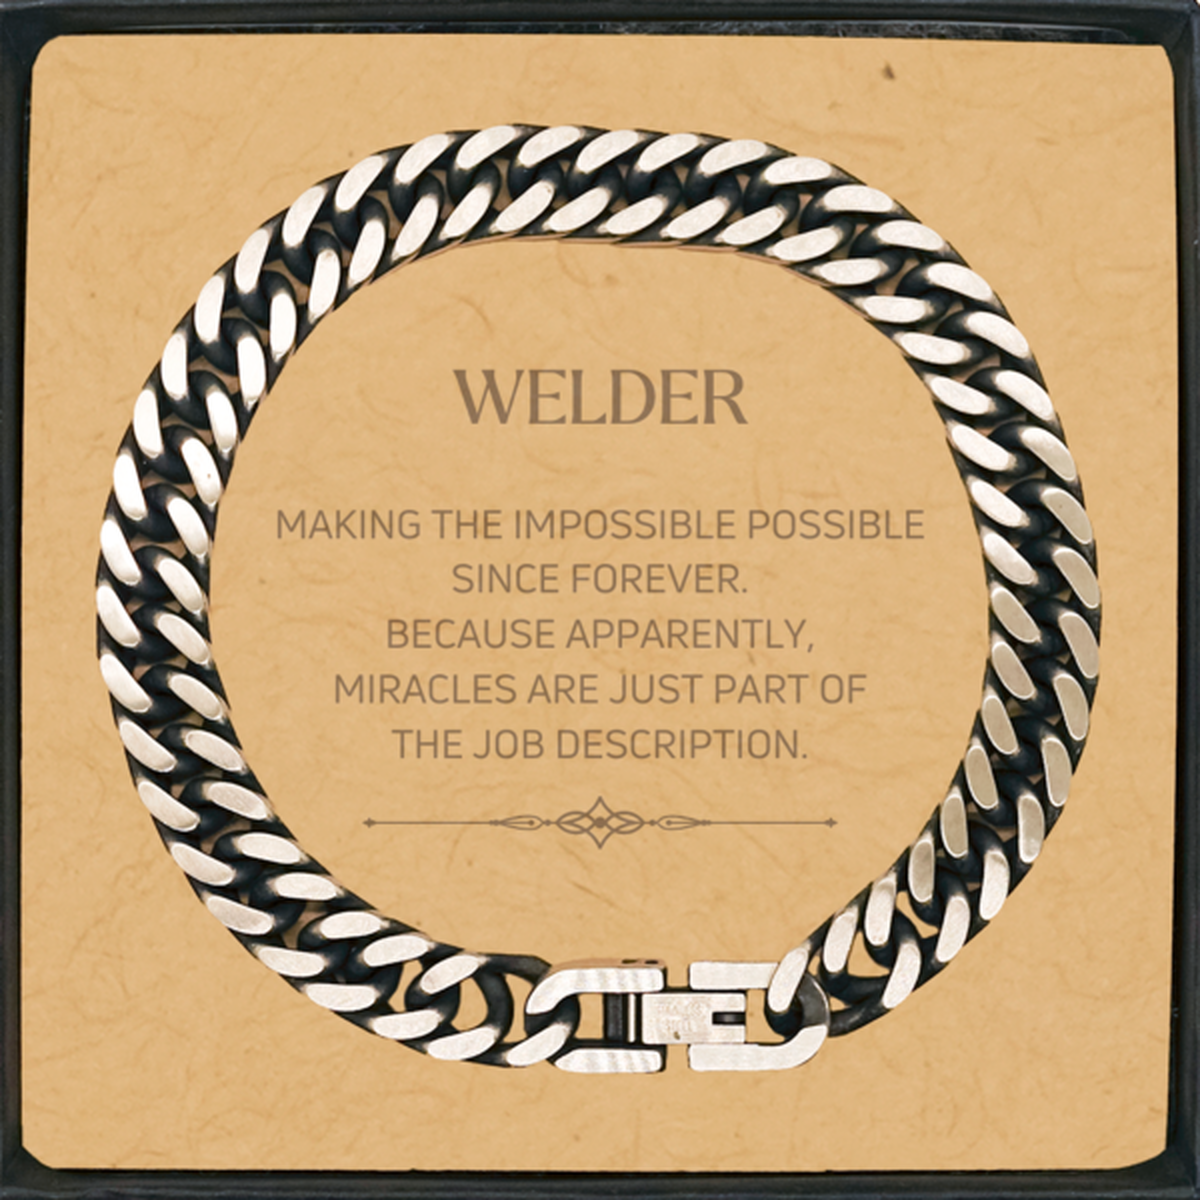 Funny Welder Gifts, Miracles are just part of the job description, Inspirational Birthday Cuban Link Chain Bracelet For Welder, Men, Women, Coworkers, Friends, Boss